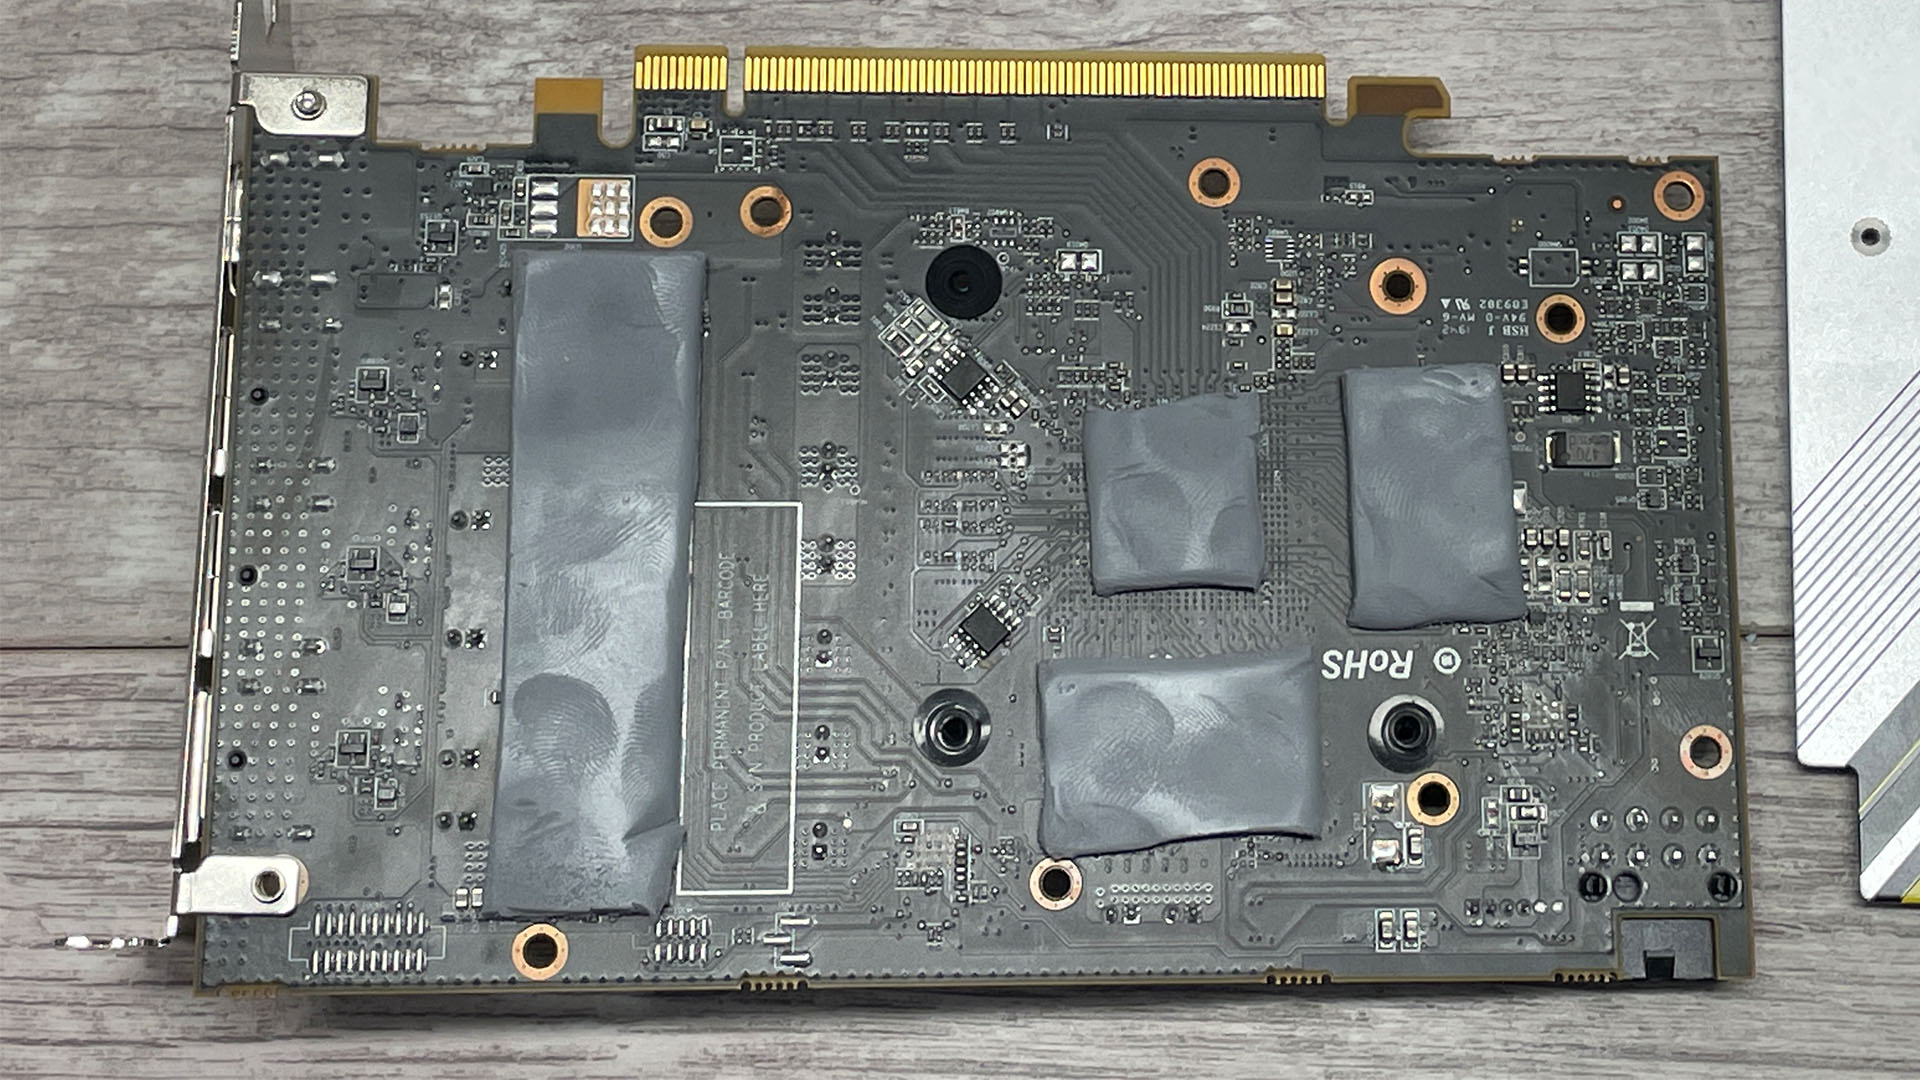 Measuring GPU thermal pad thickness for replacement (RTX 3080) 